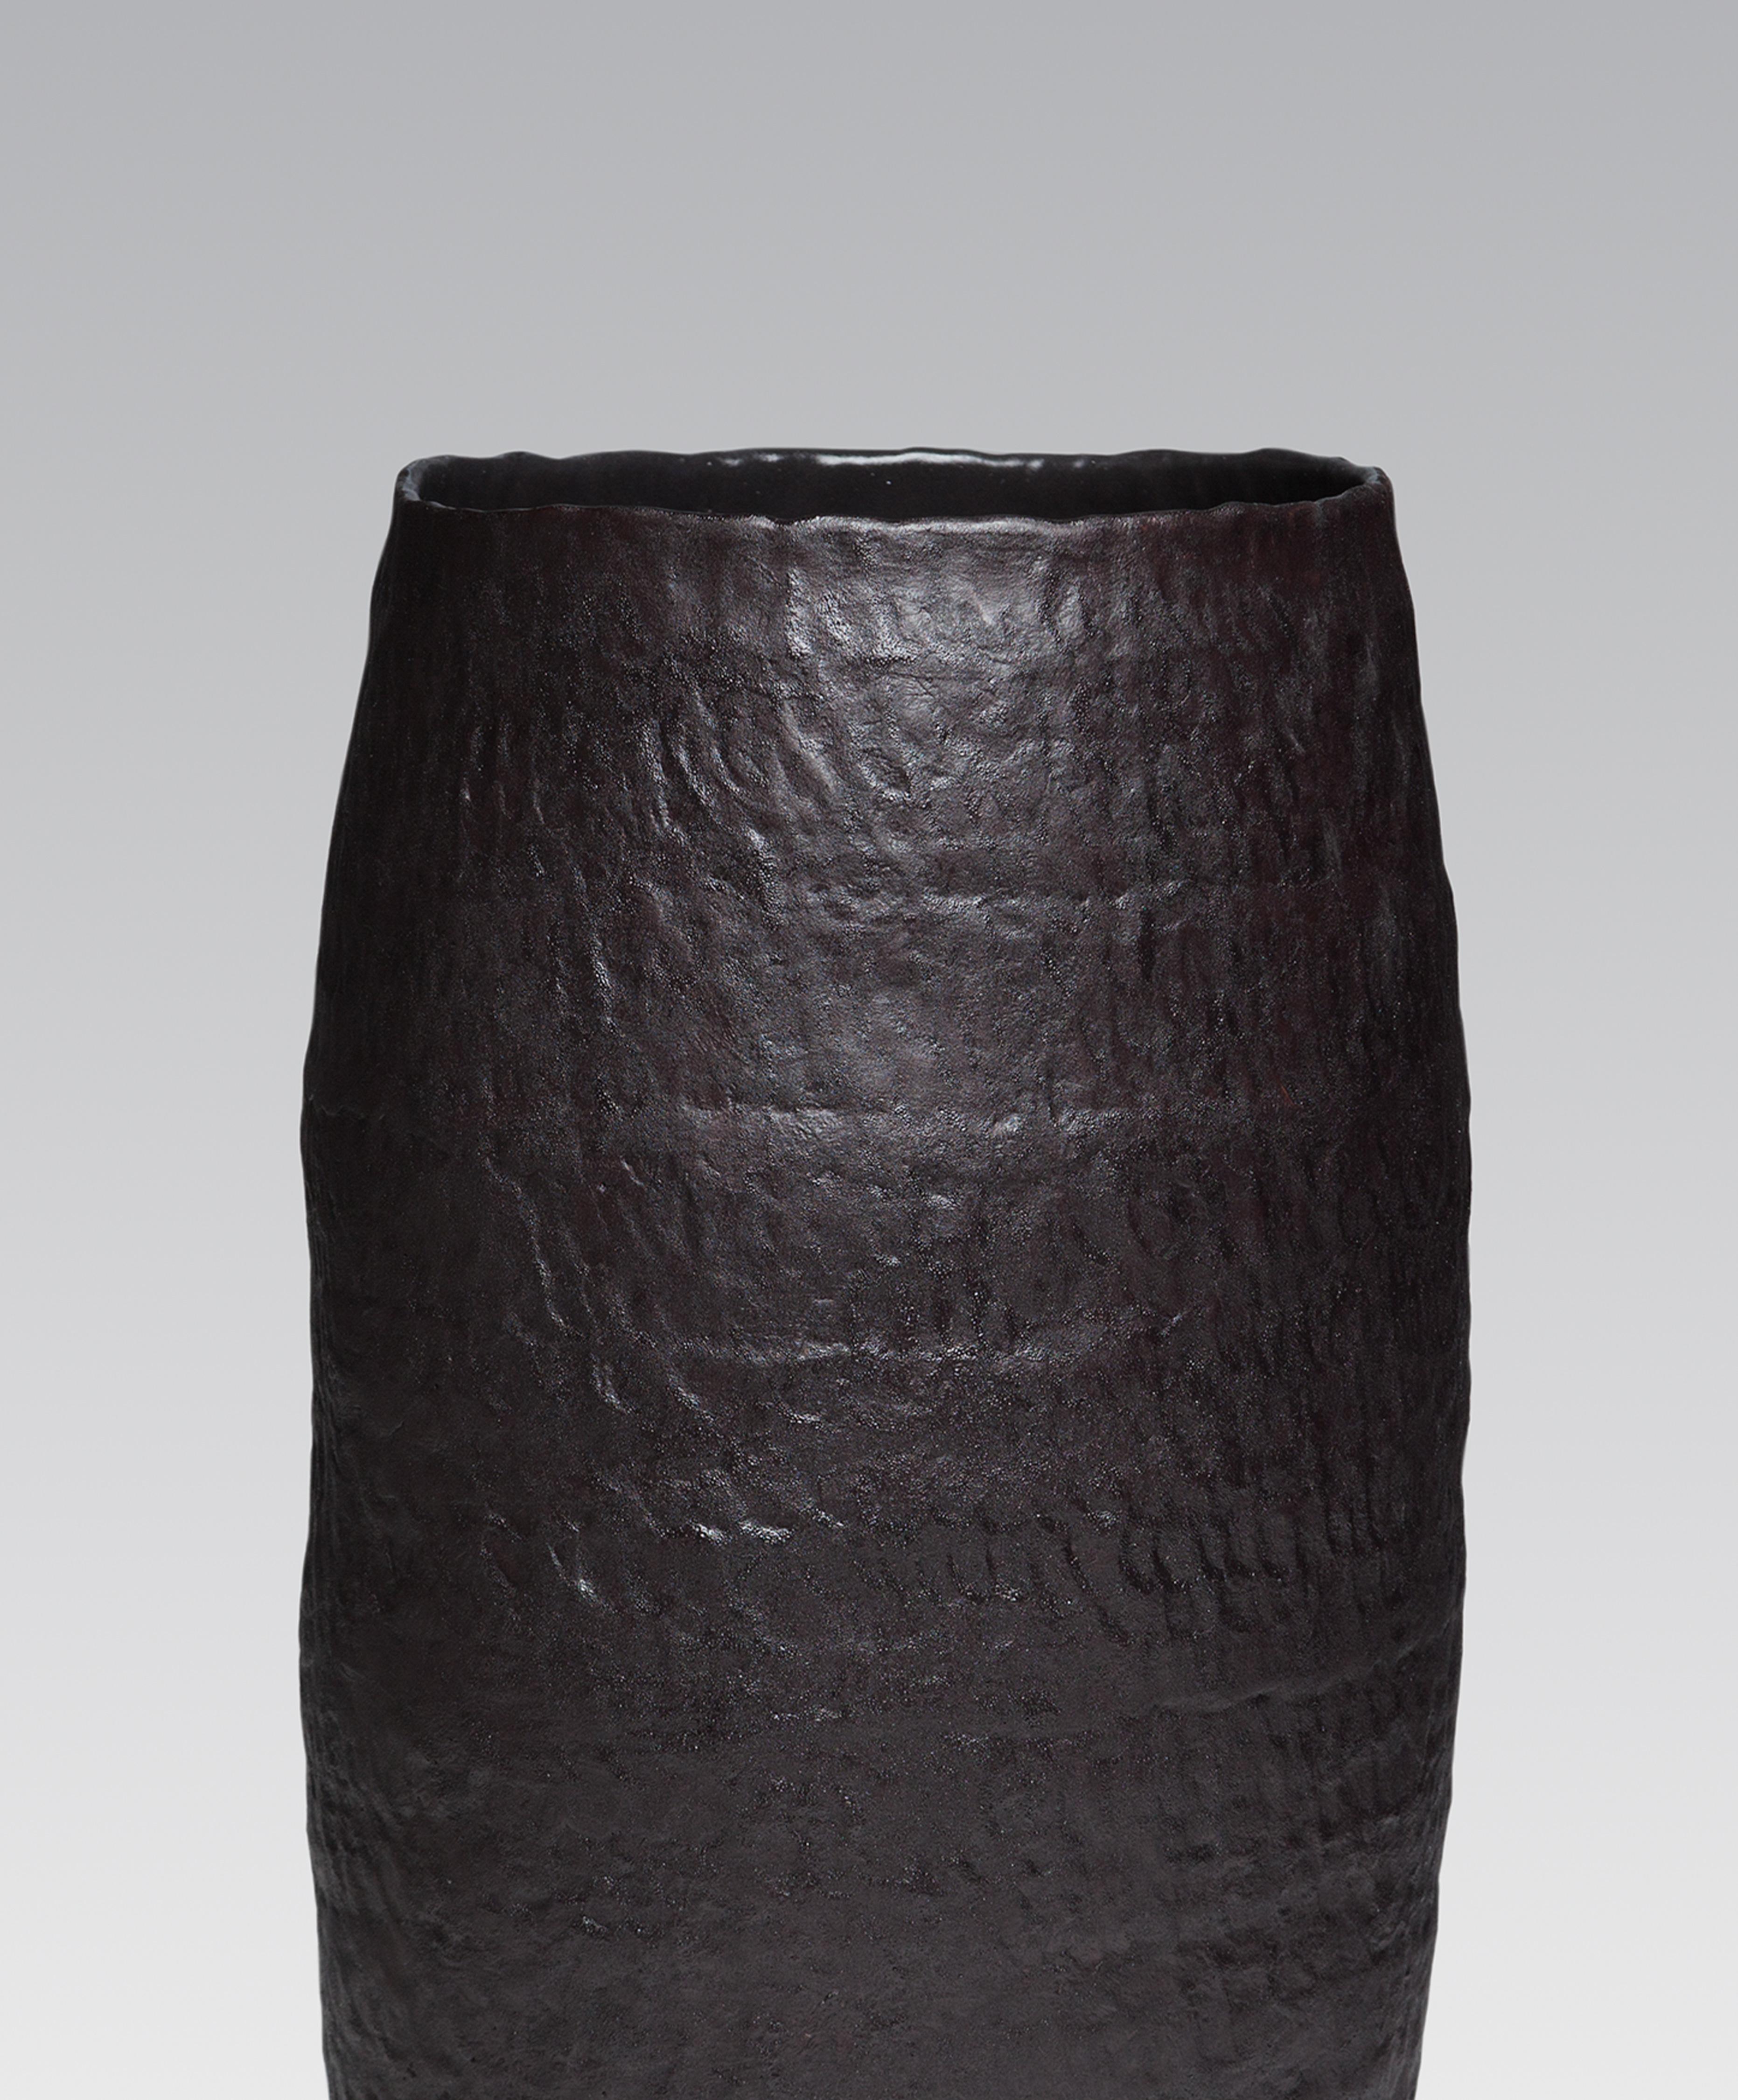 ObscuroBV01 Large vase designed and produced by Canadian artist Pascale Girardin features a partially glazed stoneware body. The entire structure is handmade. The handprints sculptured in the body are outstanding on this series of large-scale